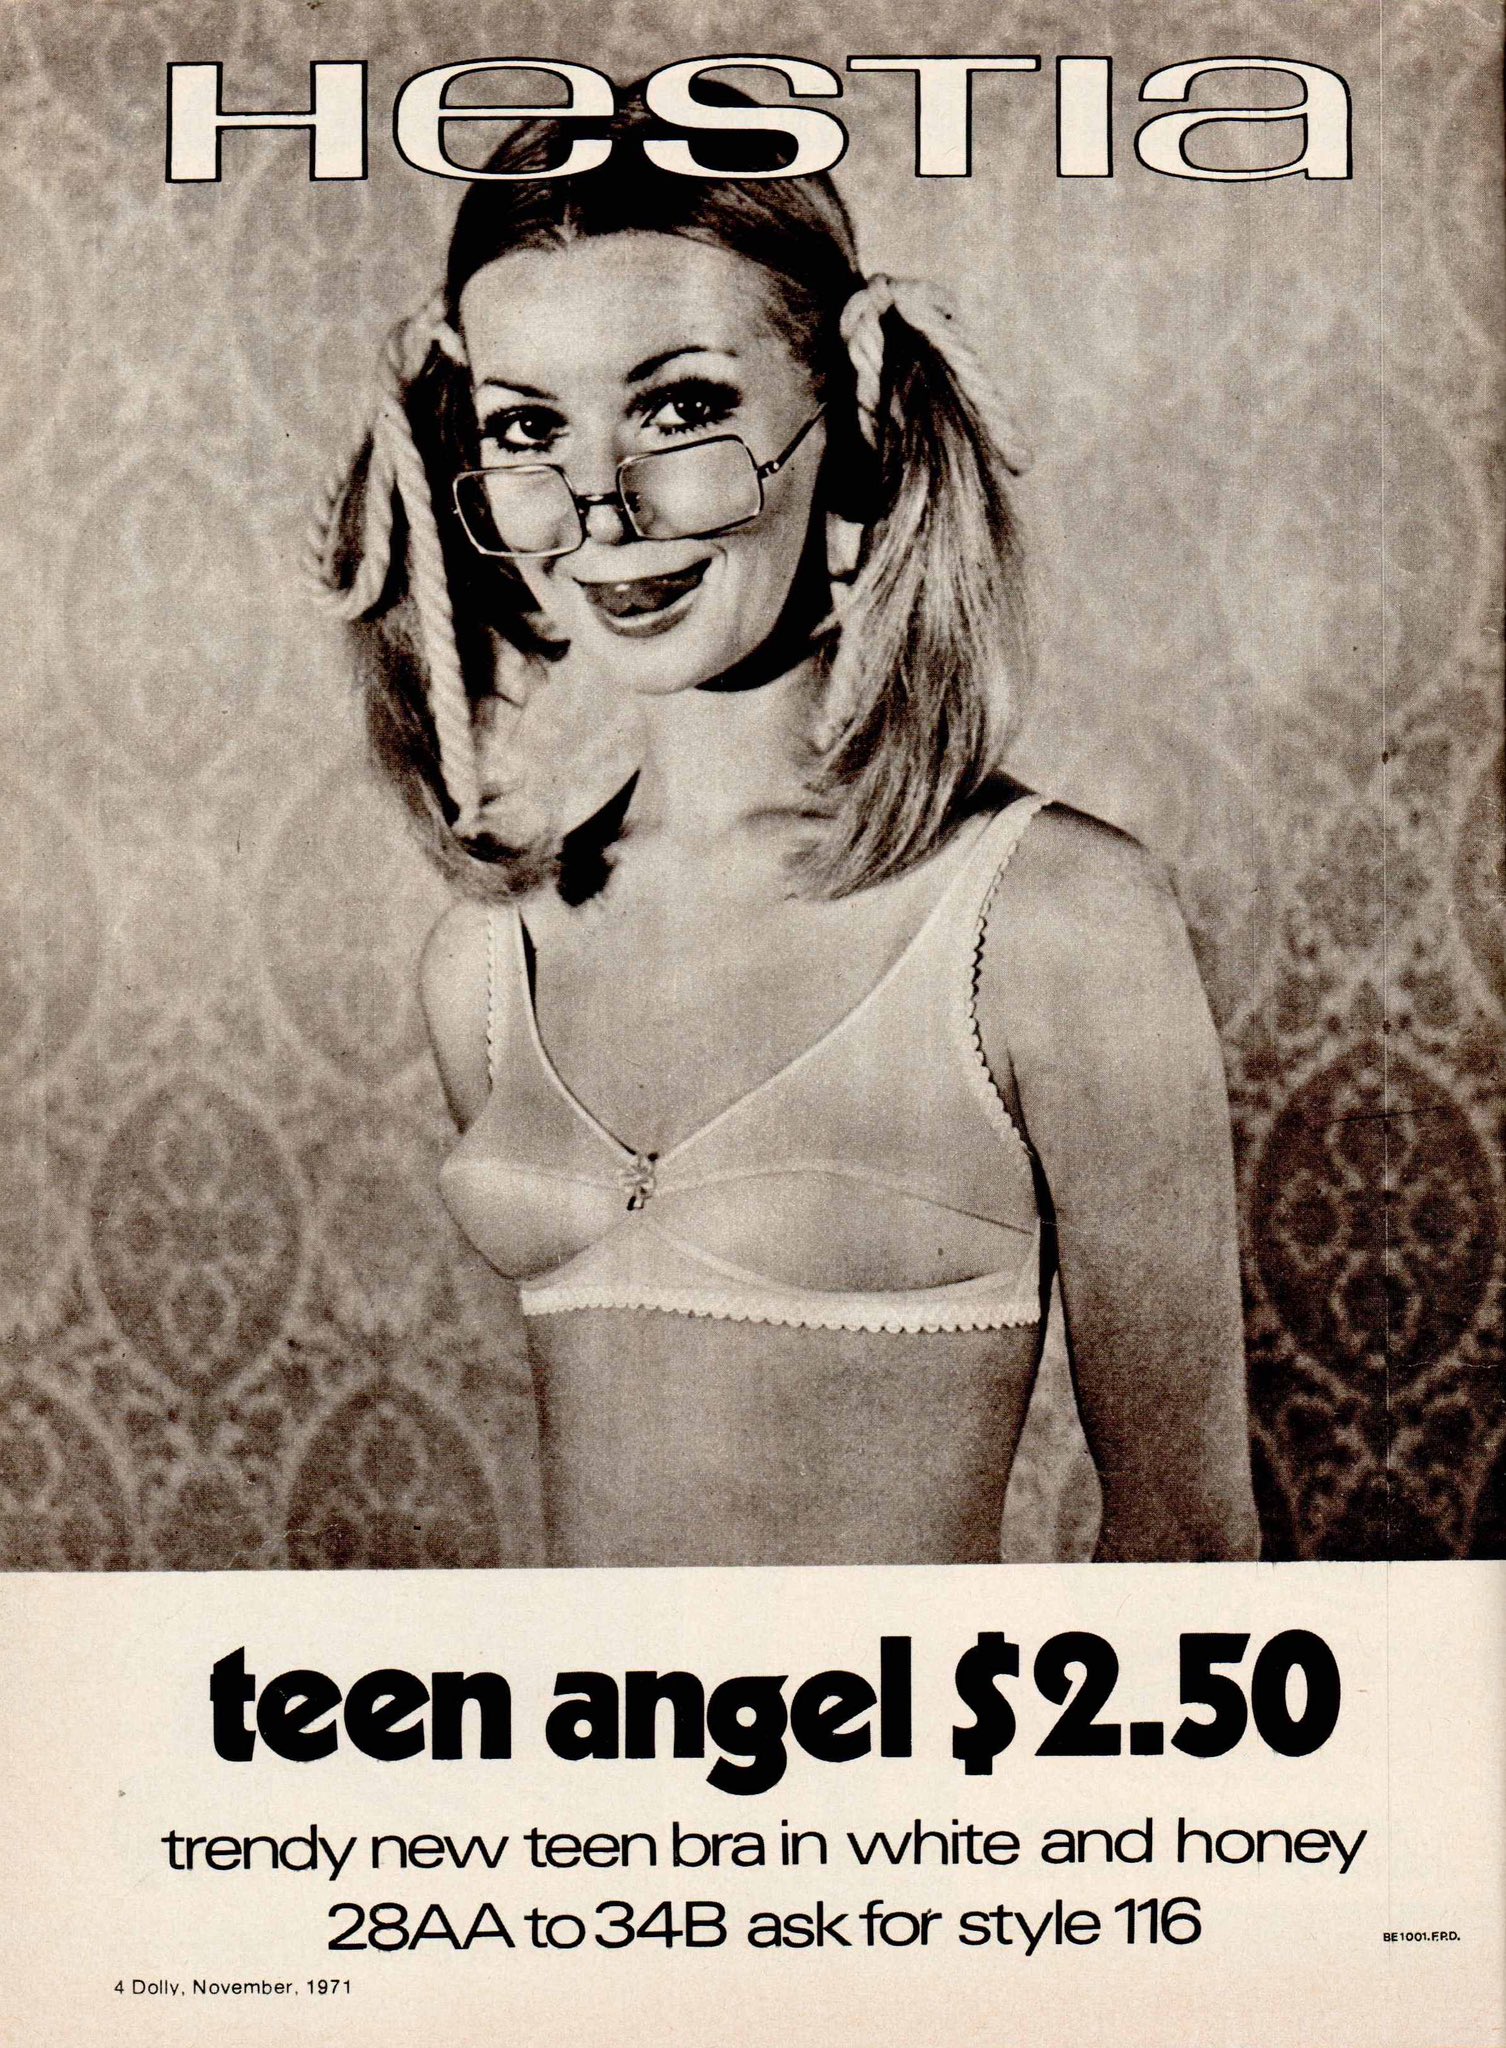 Lauren Rosewarne on X: trendy new teen bra in white and honey More from  the folks who asked us what was new in bosoms (  Hestia teen angel. Dolly, 1971.  /